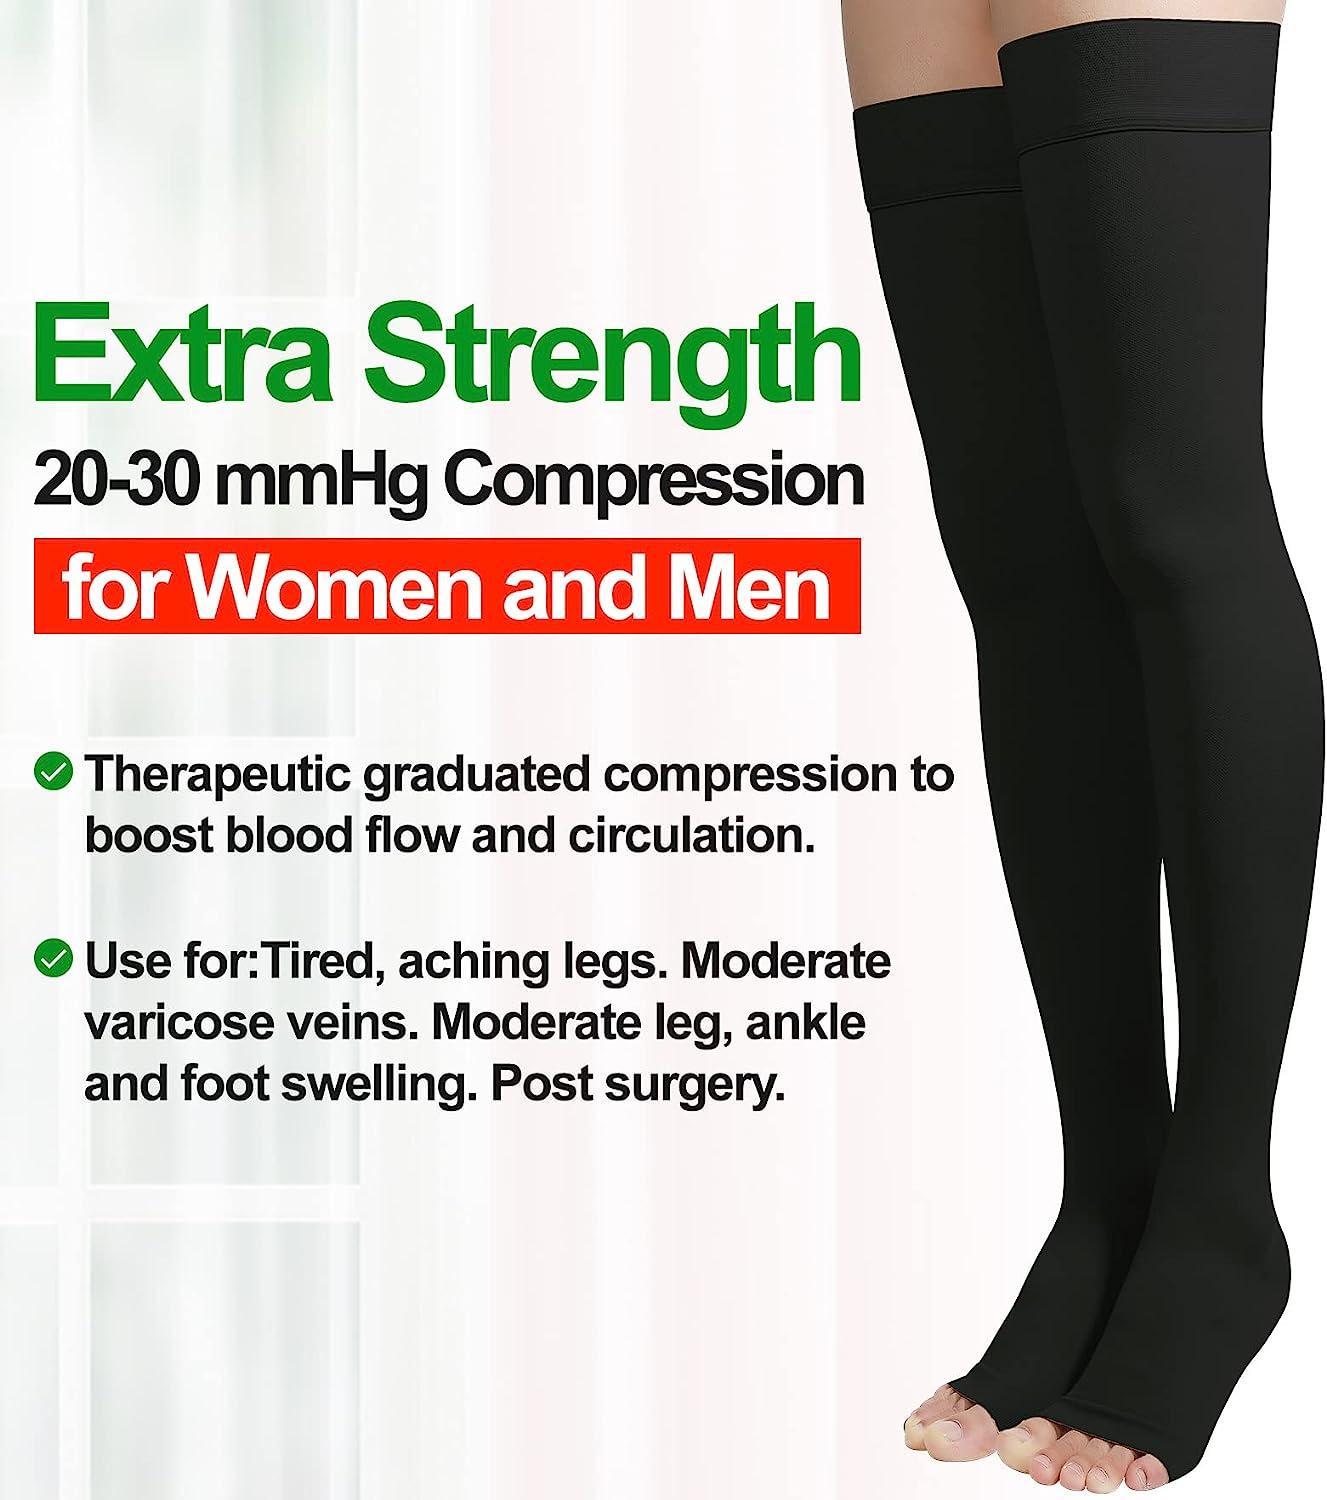 Opaque Compression Pantyhose for Women 20-30mmHg - Graduated Compression  Tights with Open Toe for Varicose Veins Circulation, Pregnancy, Edema, Leg